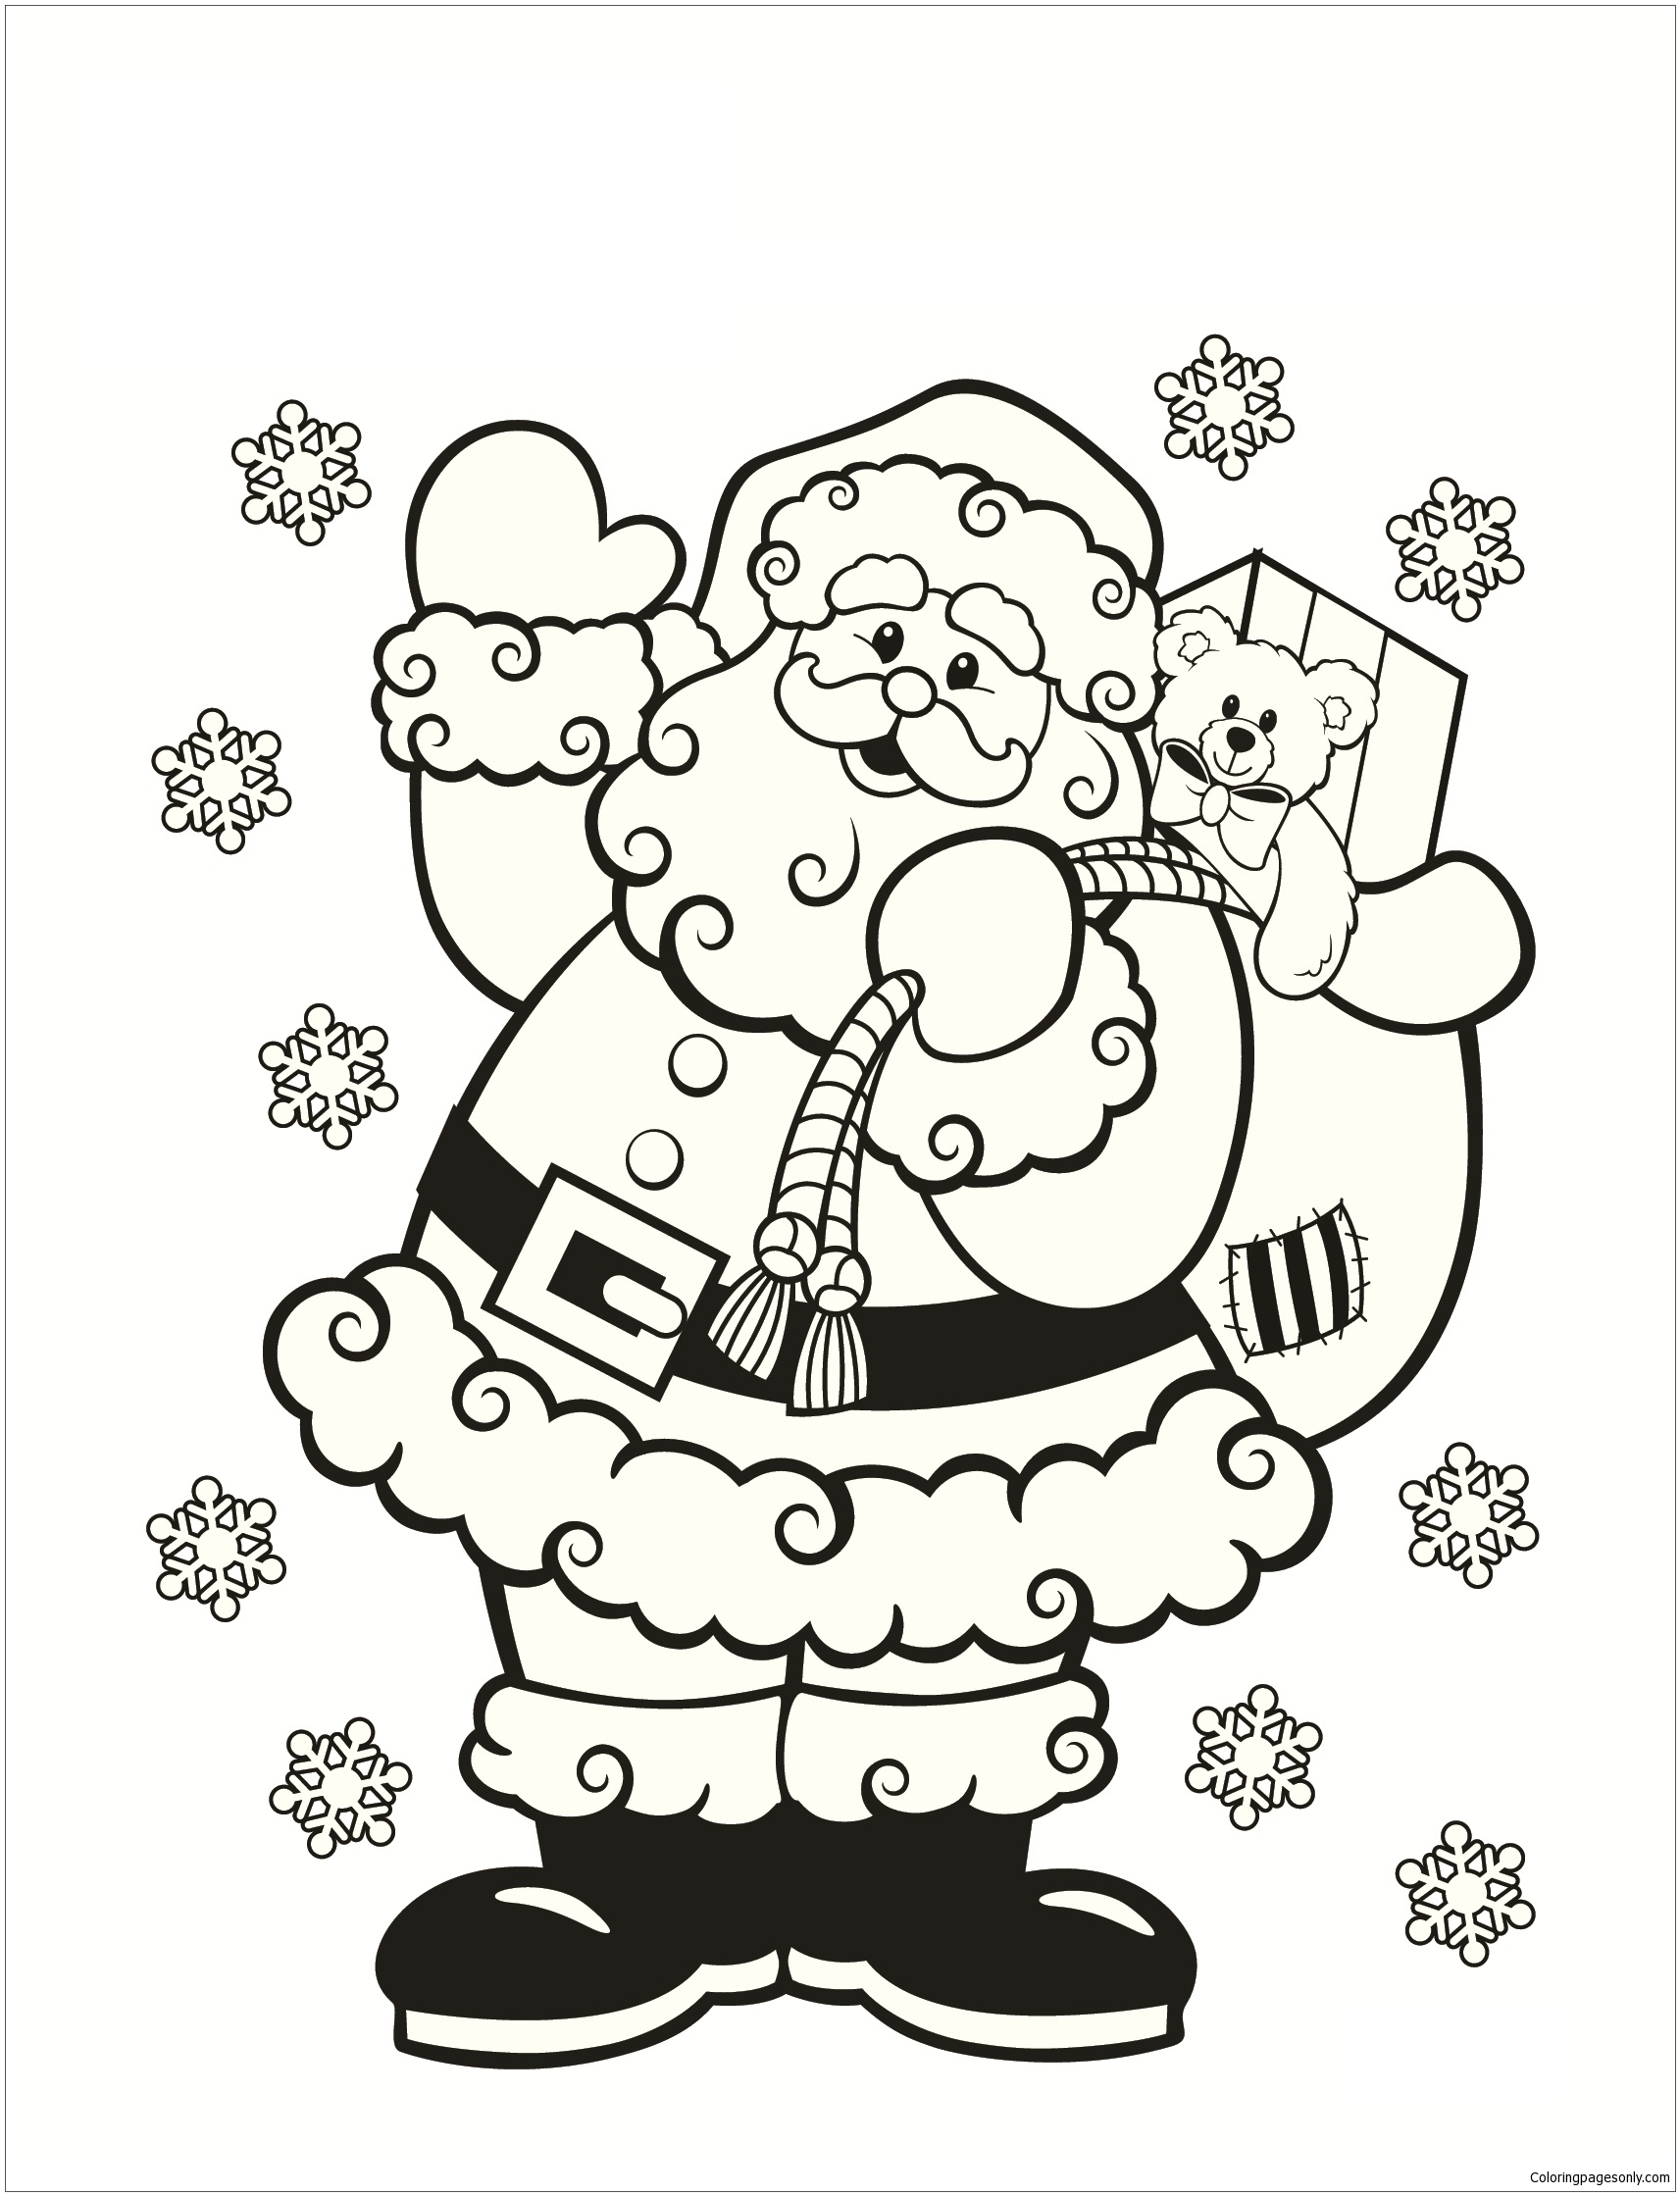 Santa Coloring Pages - Christmas Coloring Pages - Coloring Pages For